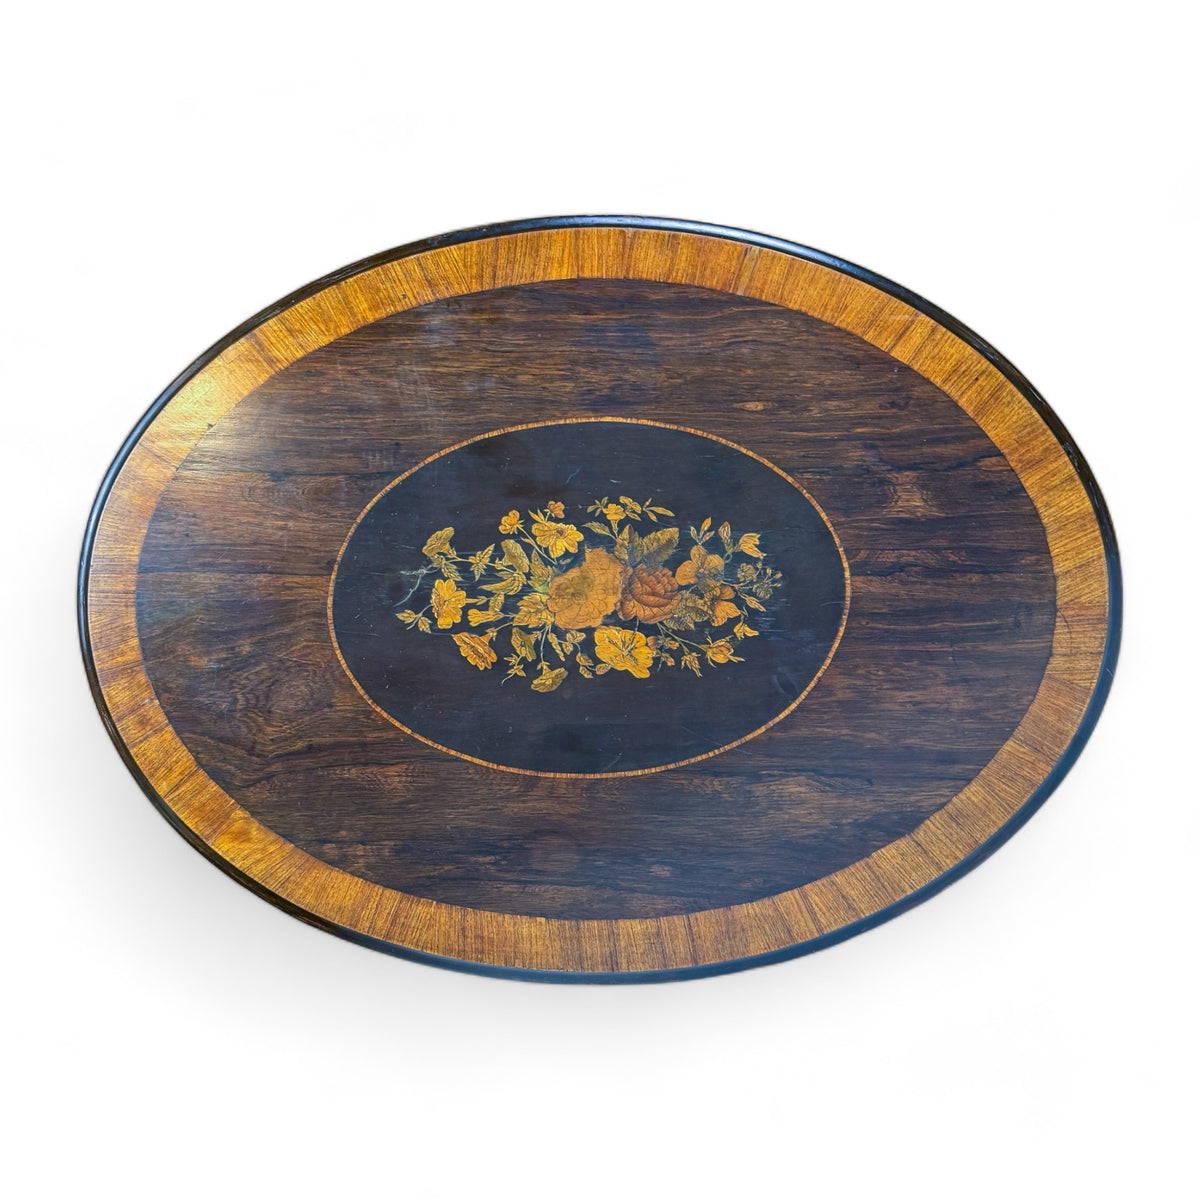 Floral Inlaid Side Table